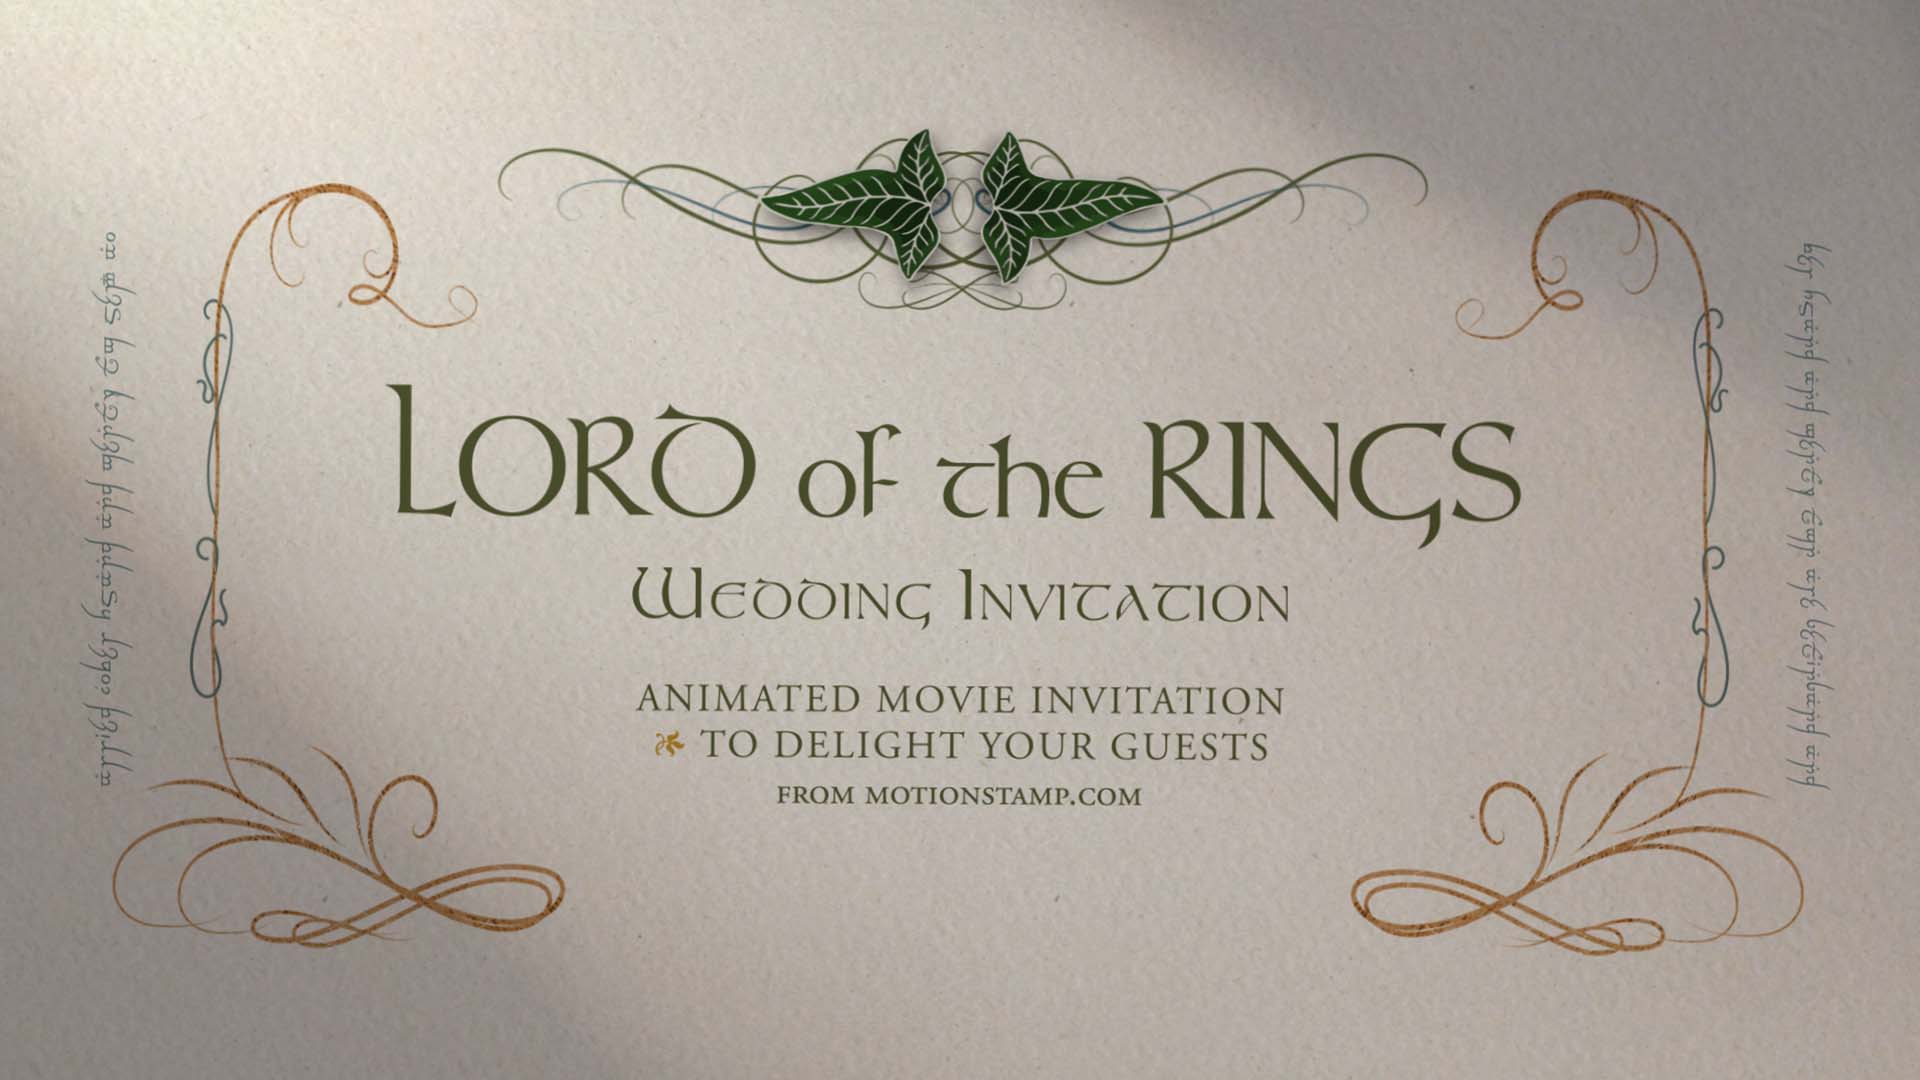 Lord of the Rings-Inspired One Ring Invitations – Uniquely Inviting